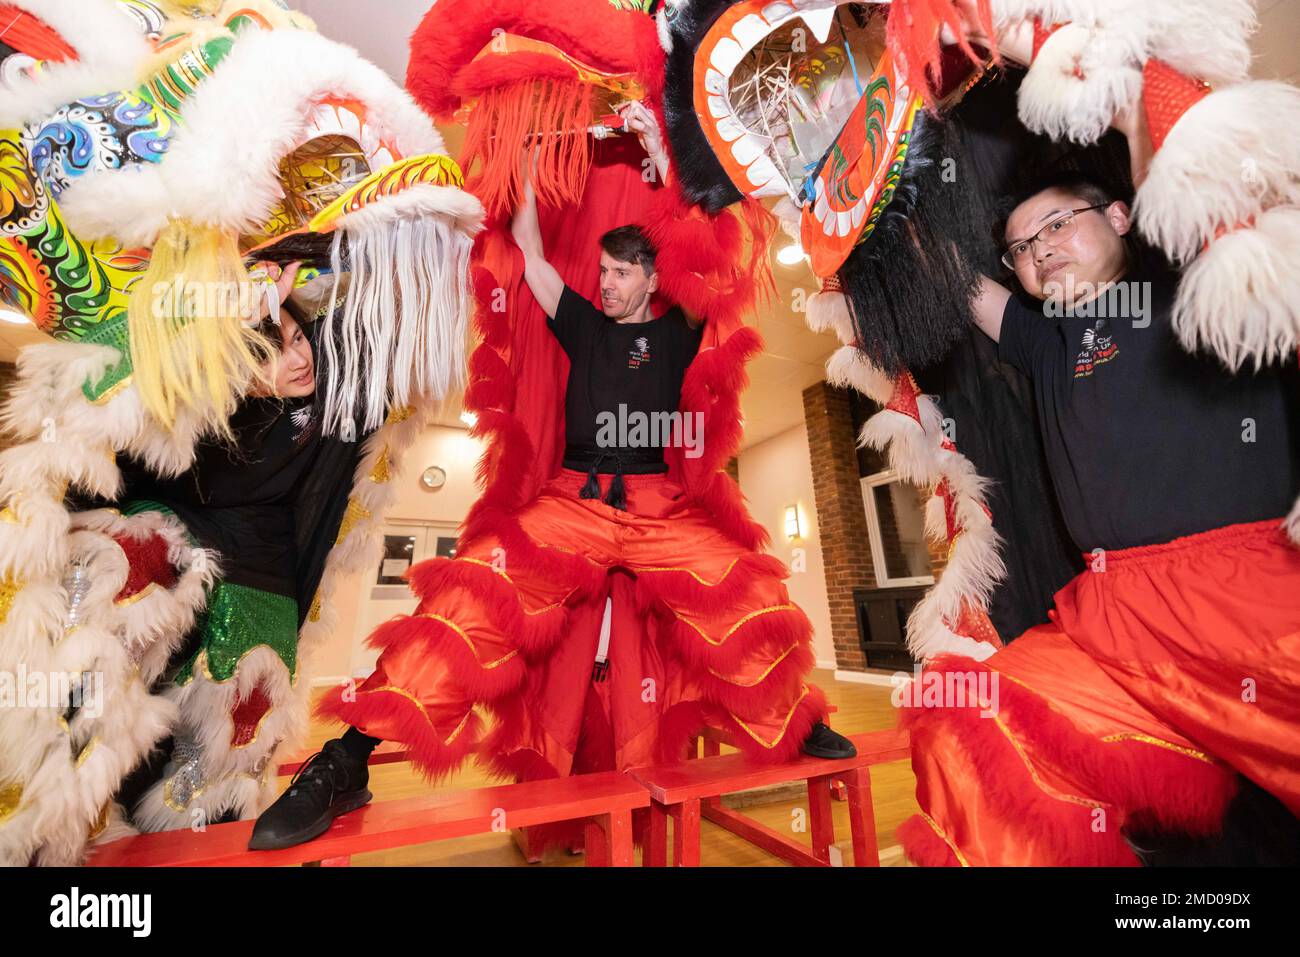 Members of the World Eagle Claw Association UK Lion Dance Team rehearse ahead of Chinese New Year celebrations in their local community hall, England. Stock Photo